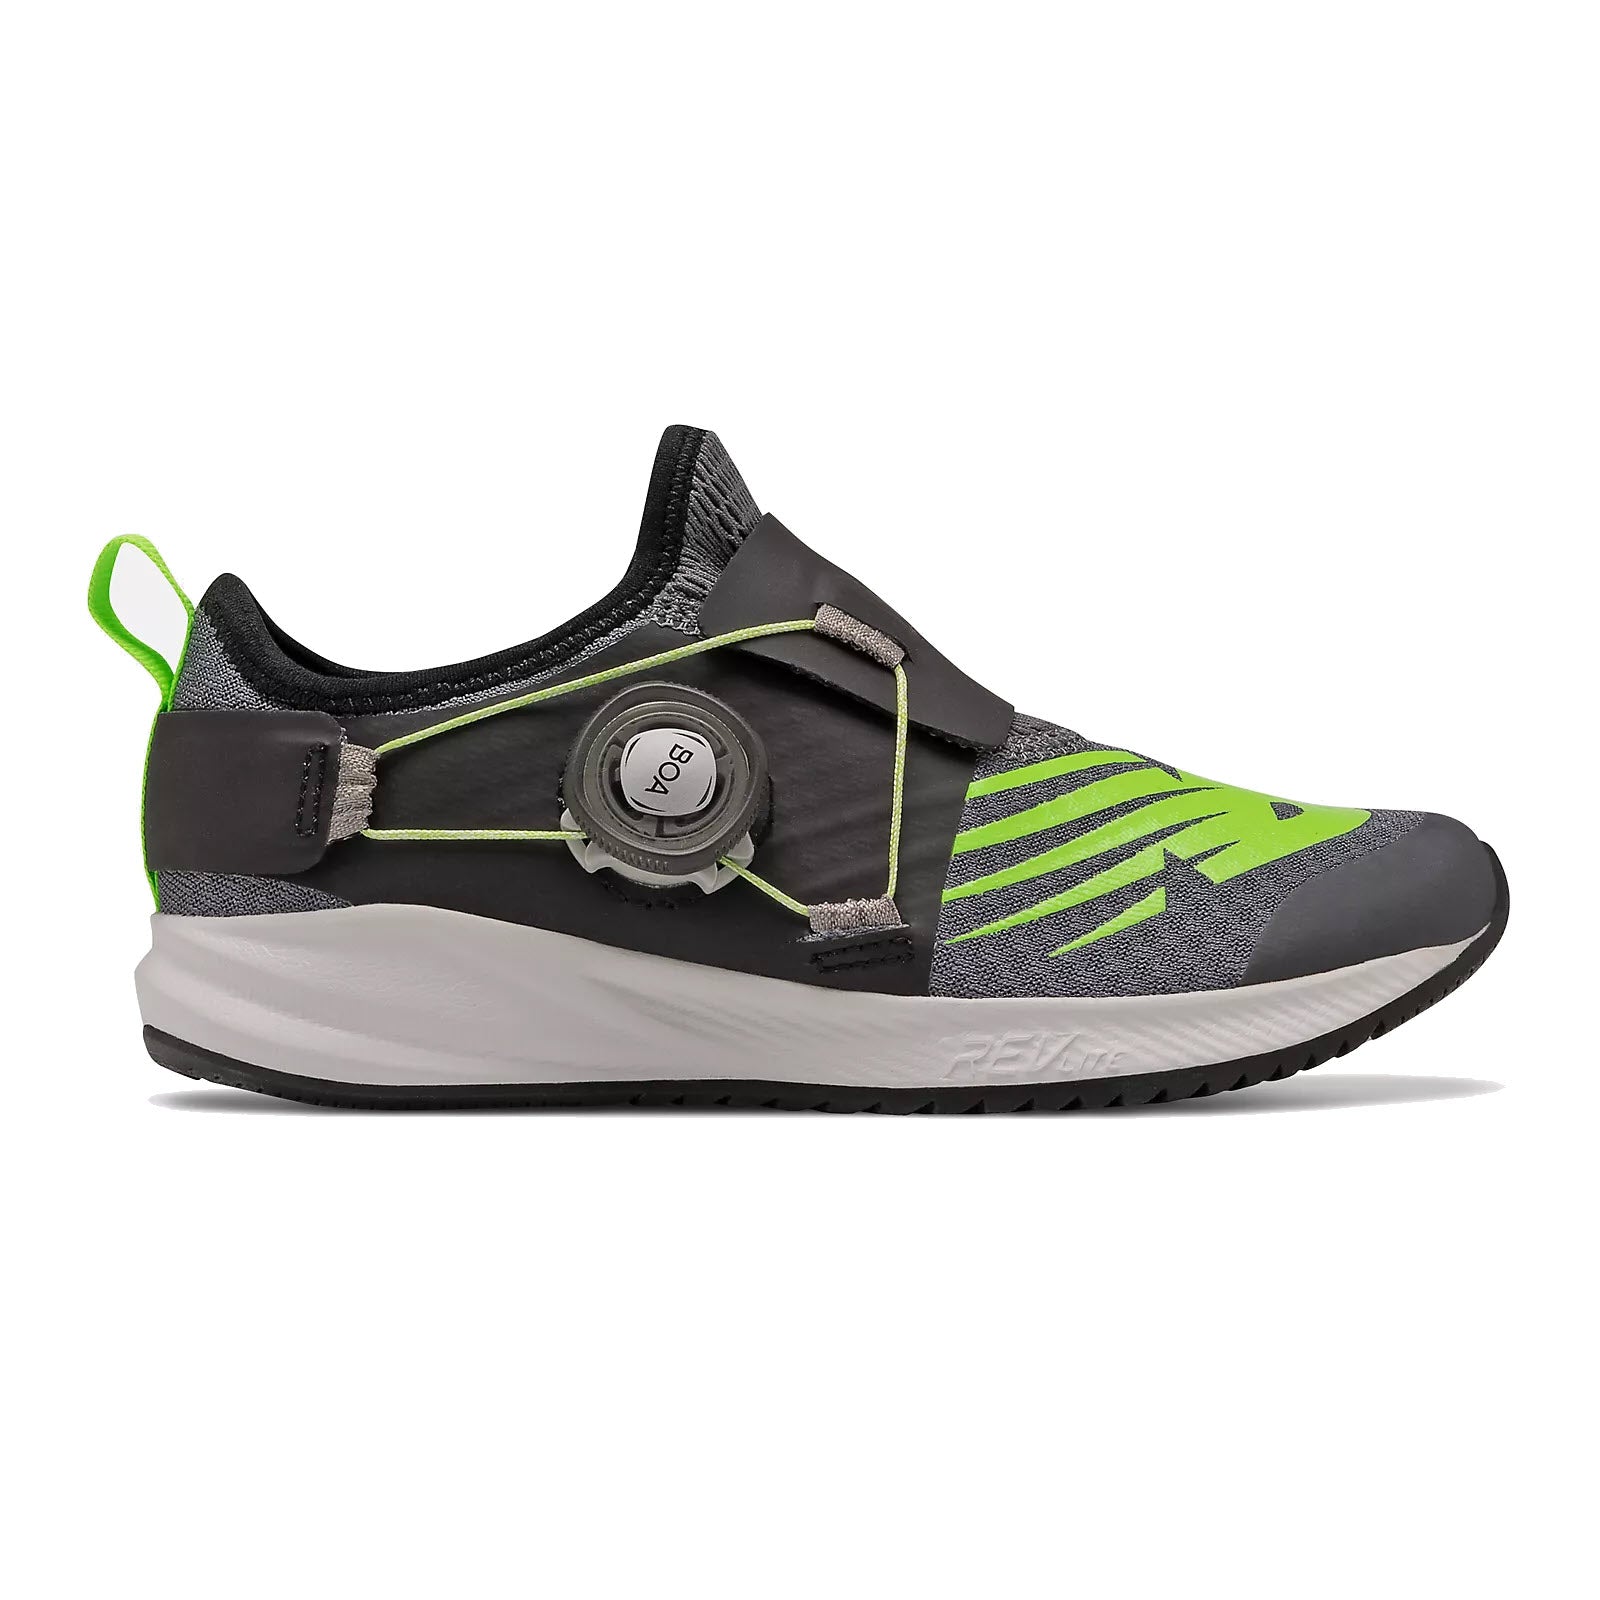 A modern athletic shoe featuring the New Balance FuelCore Reveal Boa Lead/Black/Green - Kids and a vibrant green accent.